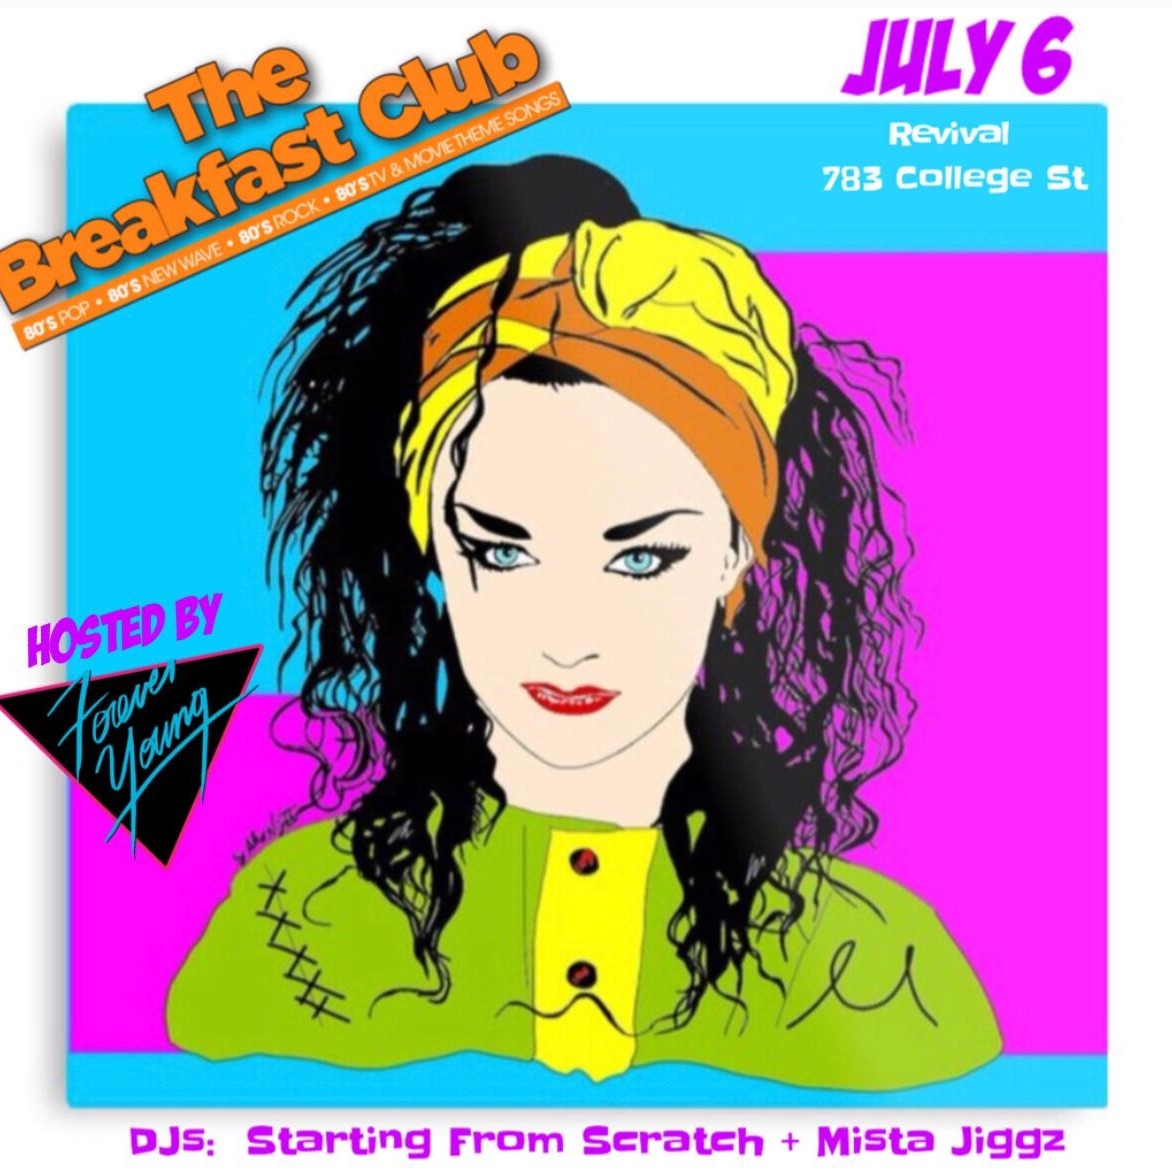 THE RETURN OF THE BREAKFAST CLUB 80s TRIBUTE PARTY